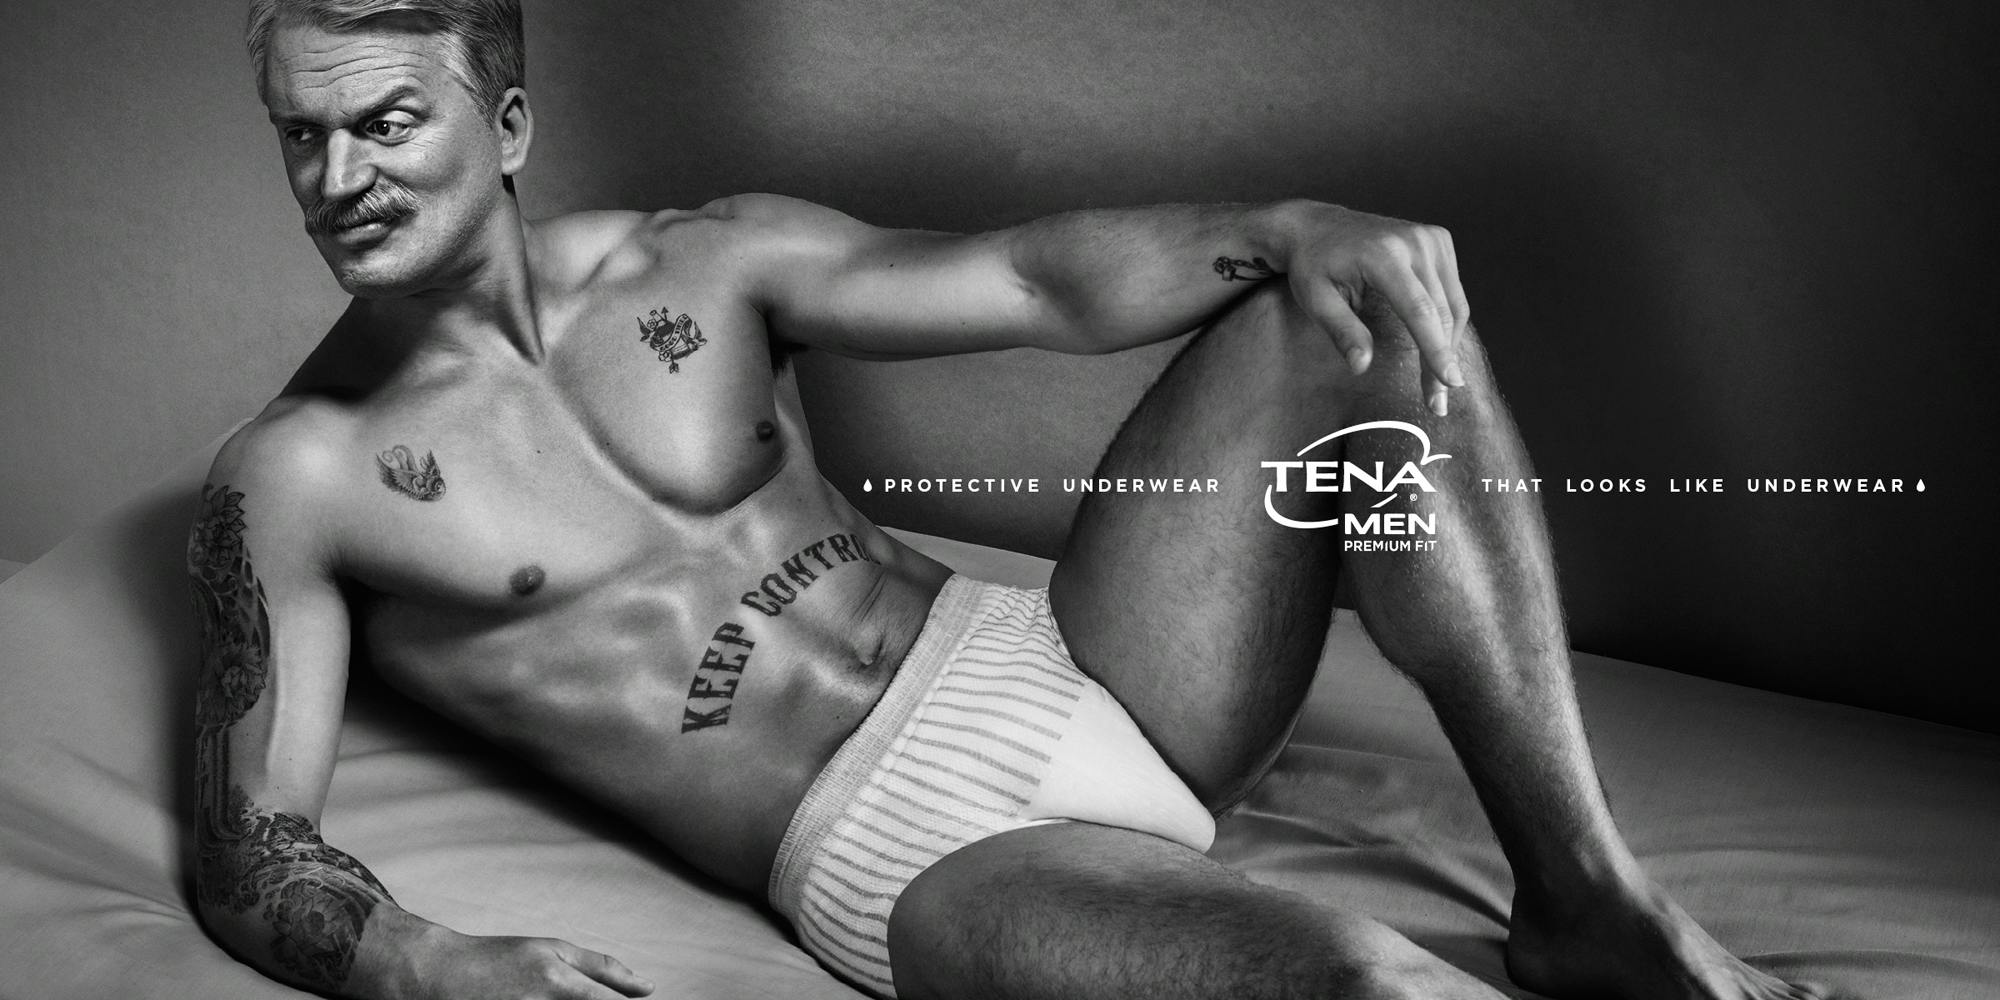 TENA Men launches new Washable Underwear campaign 'Wear it with